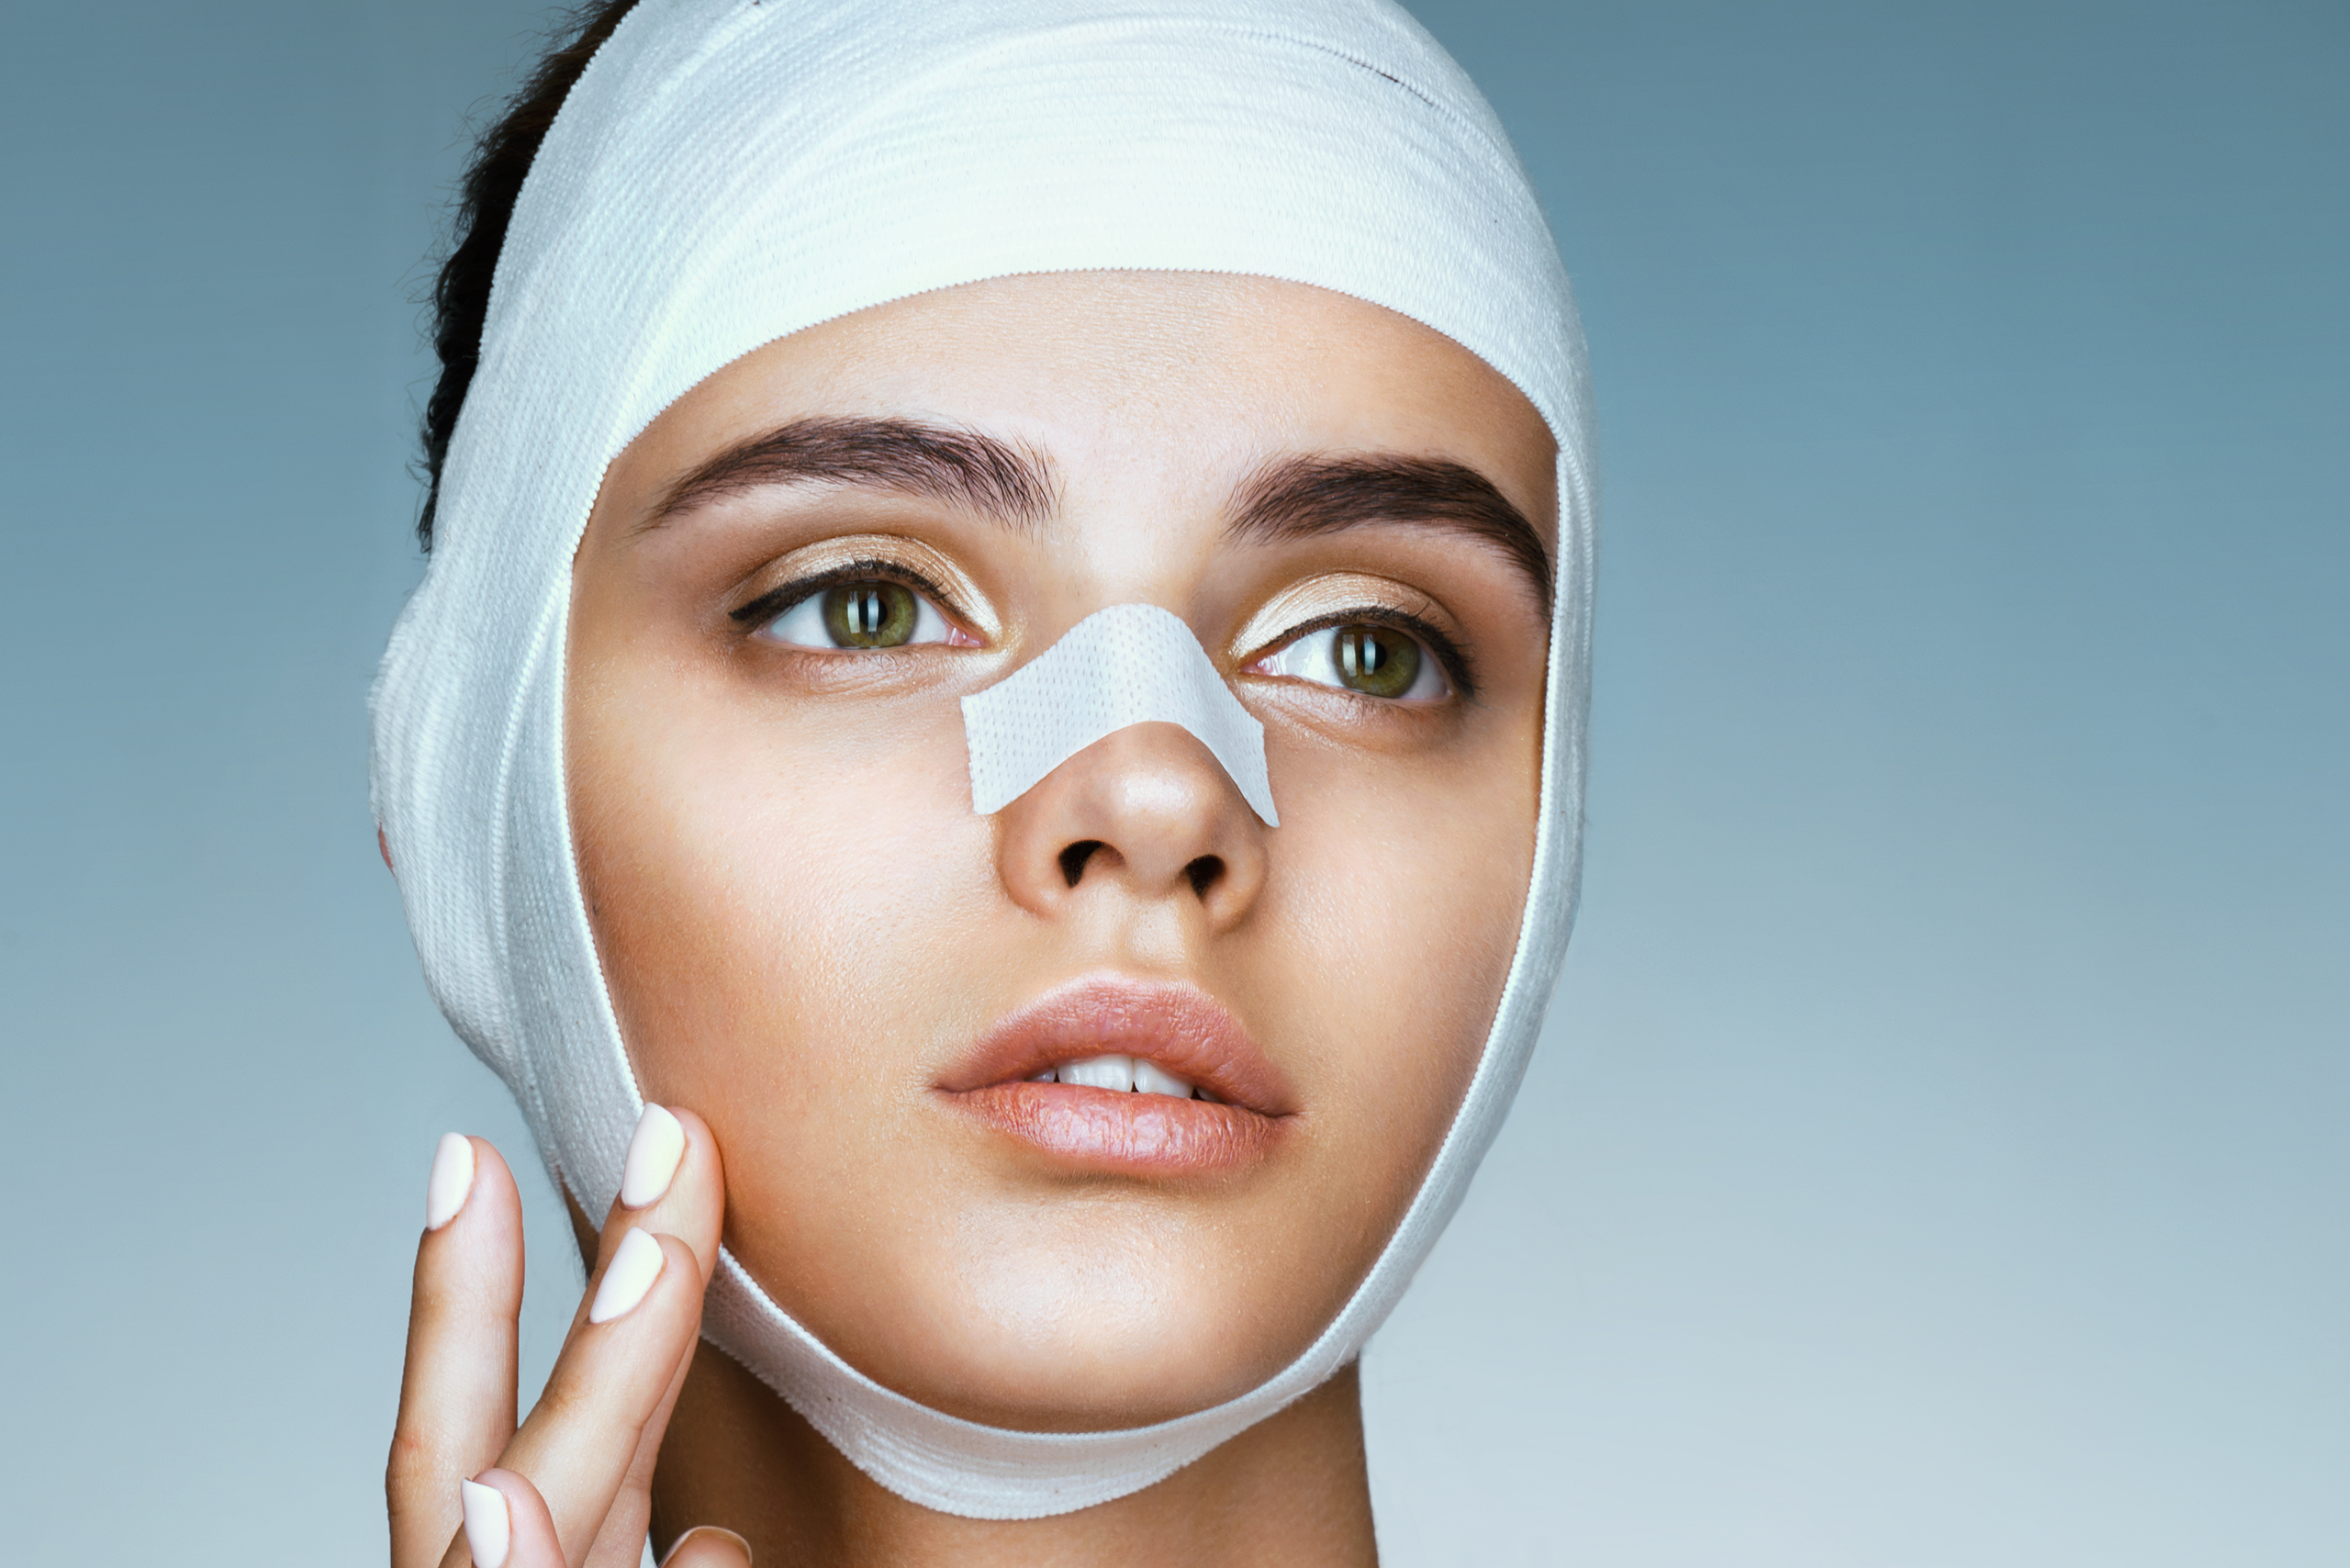 Plastic Surgeons Share Their Best Tips and Tricks for a Speedy Recovery -  NewBeauty